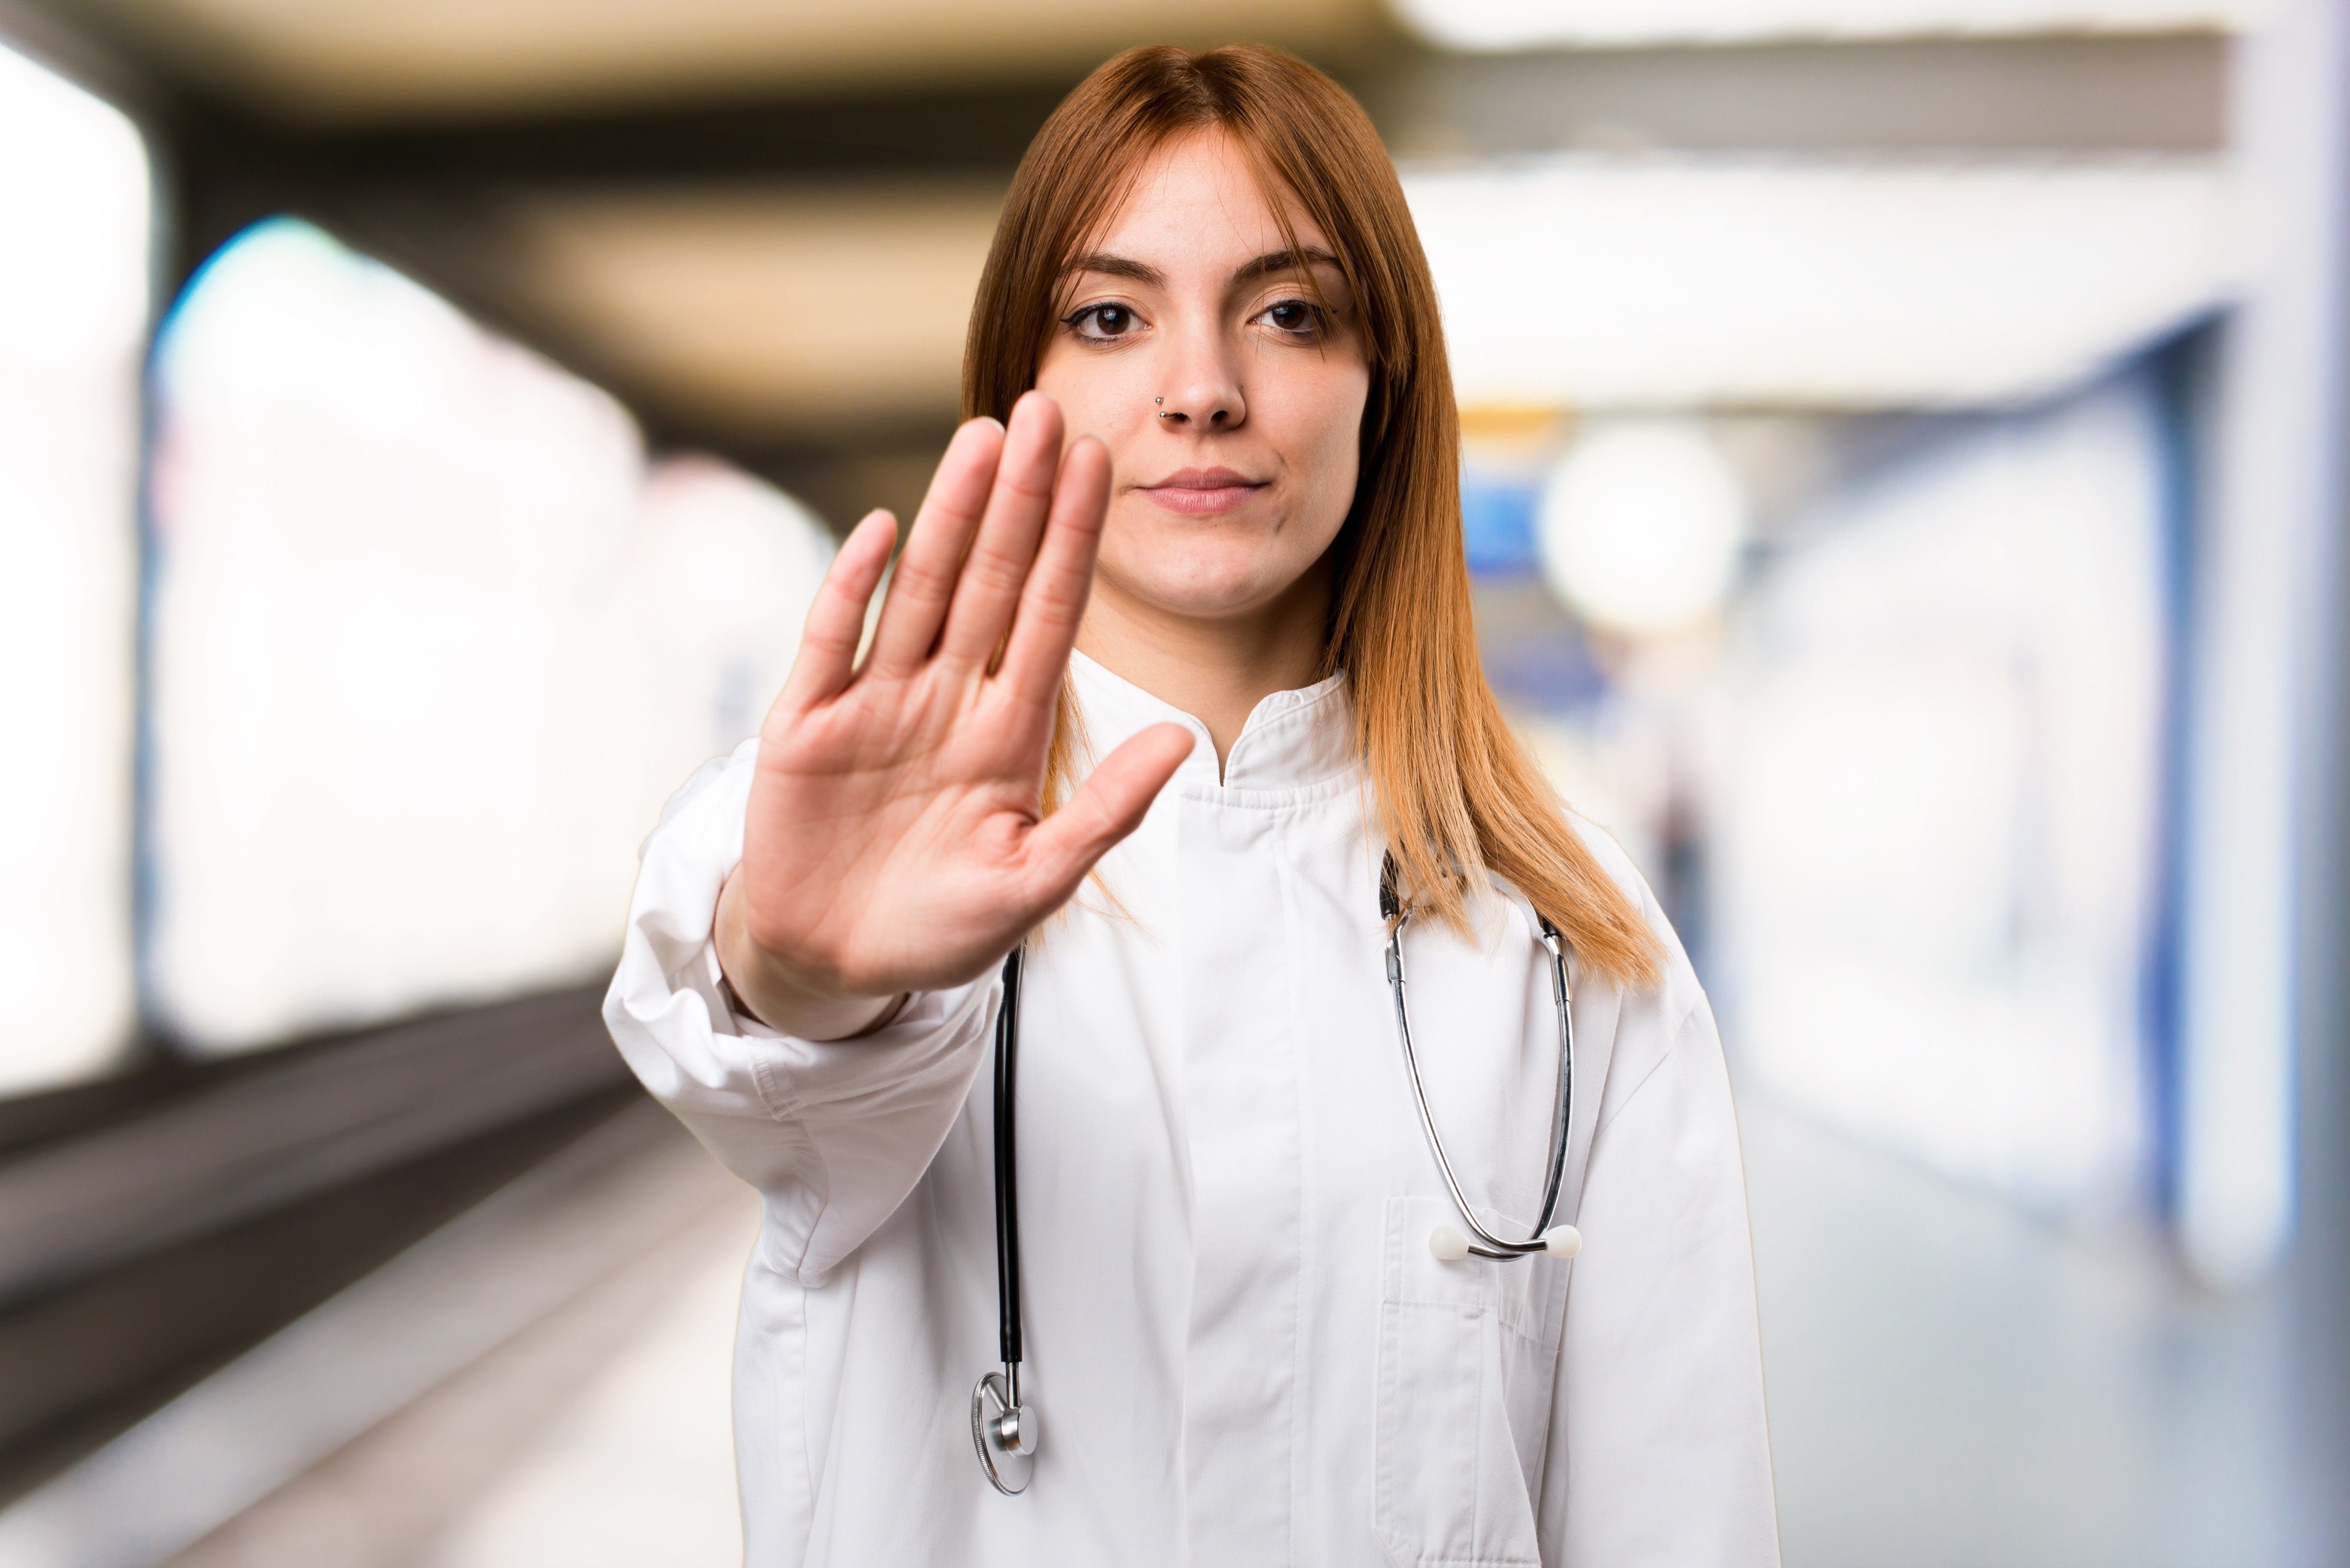 A doctor putting her hand up | Source: Shutterstock